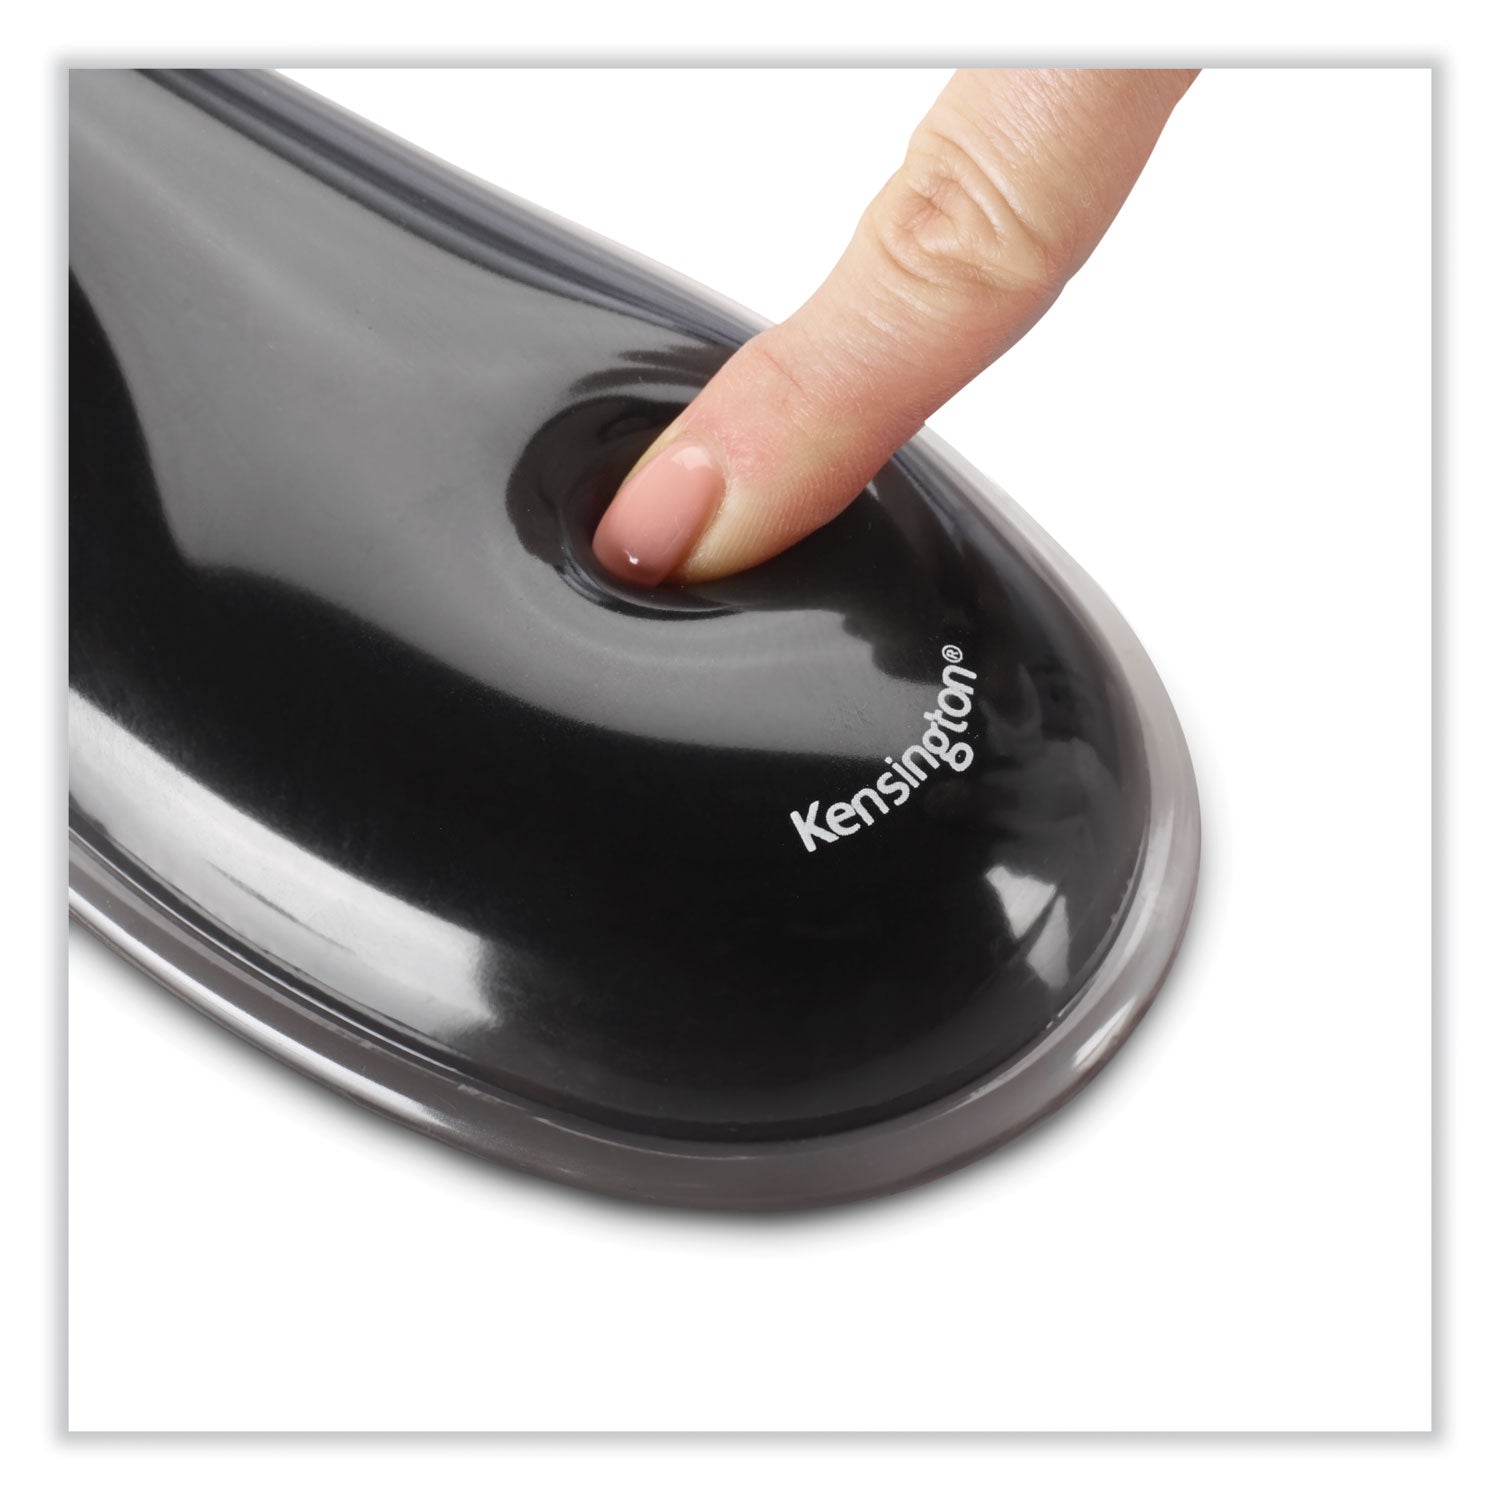 duo-gel-wave-mouse-pad-with-wrist-rest-937-x-13-blue_kmw62401 - 4